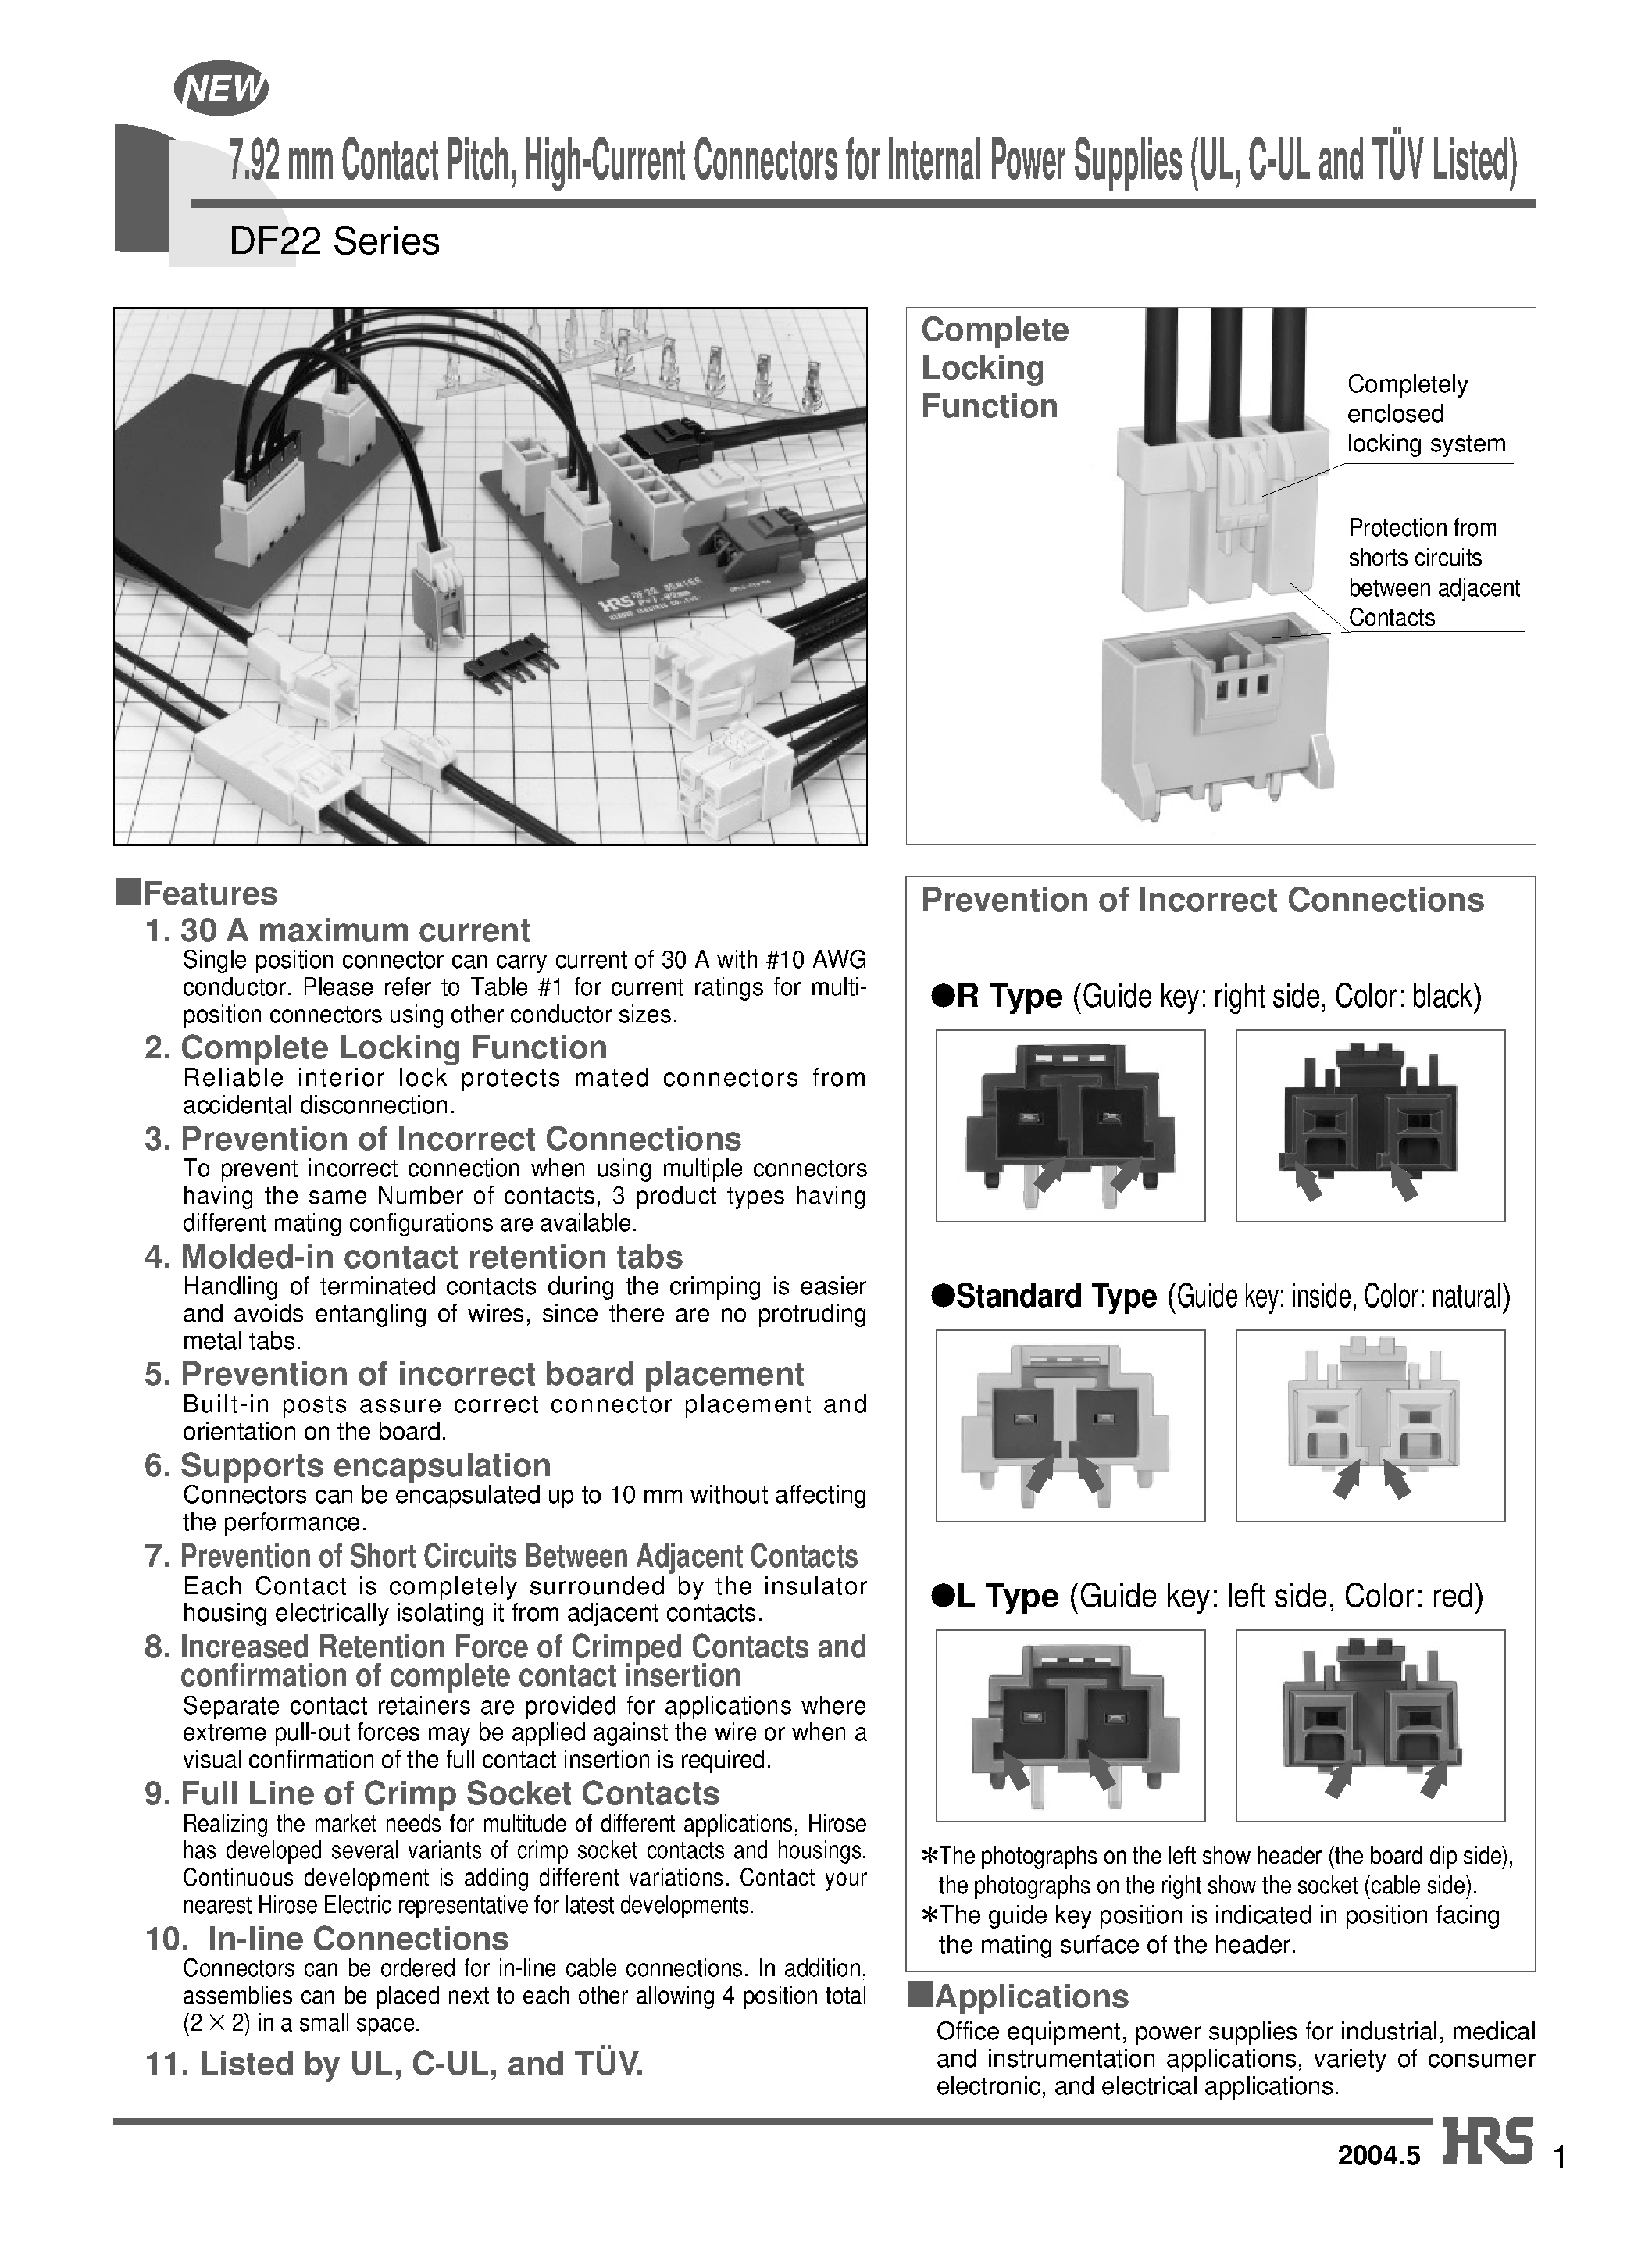 Datasheet DF22-3S-7.92C - 7.92 mm Contact Pitch/ High-Current Connectors for Internal Power Supplies (UL/ C-UL and TUV Listed) page 1